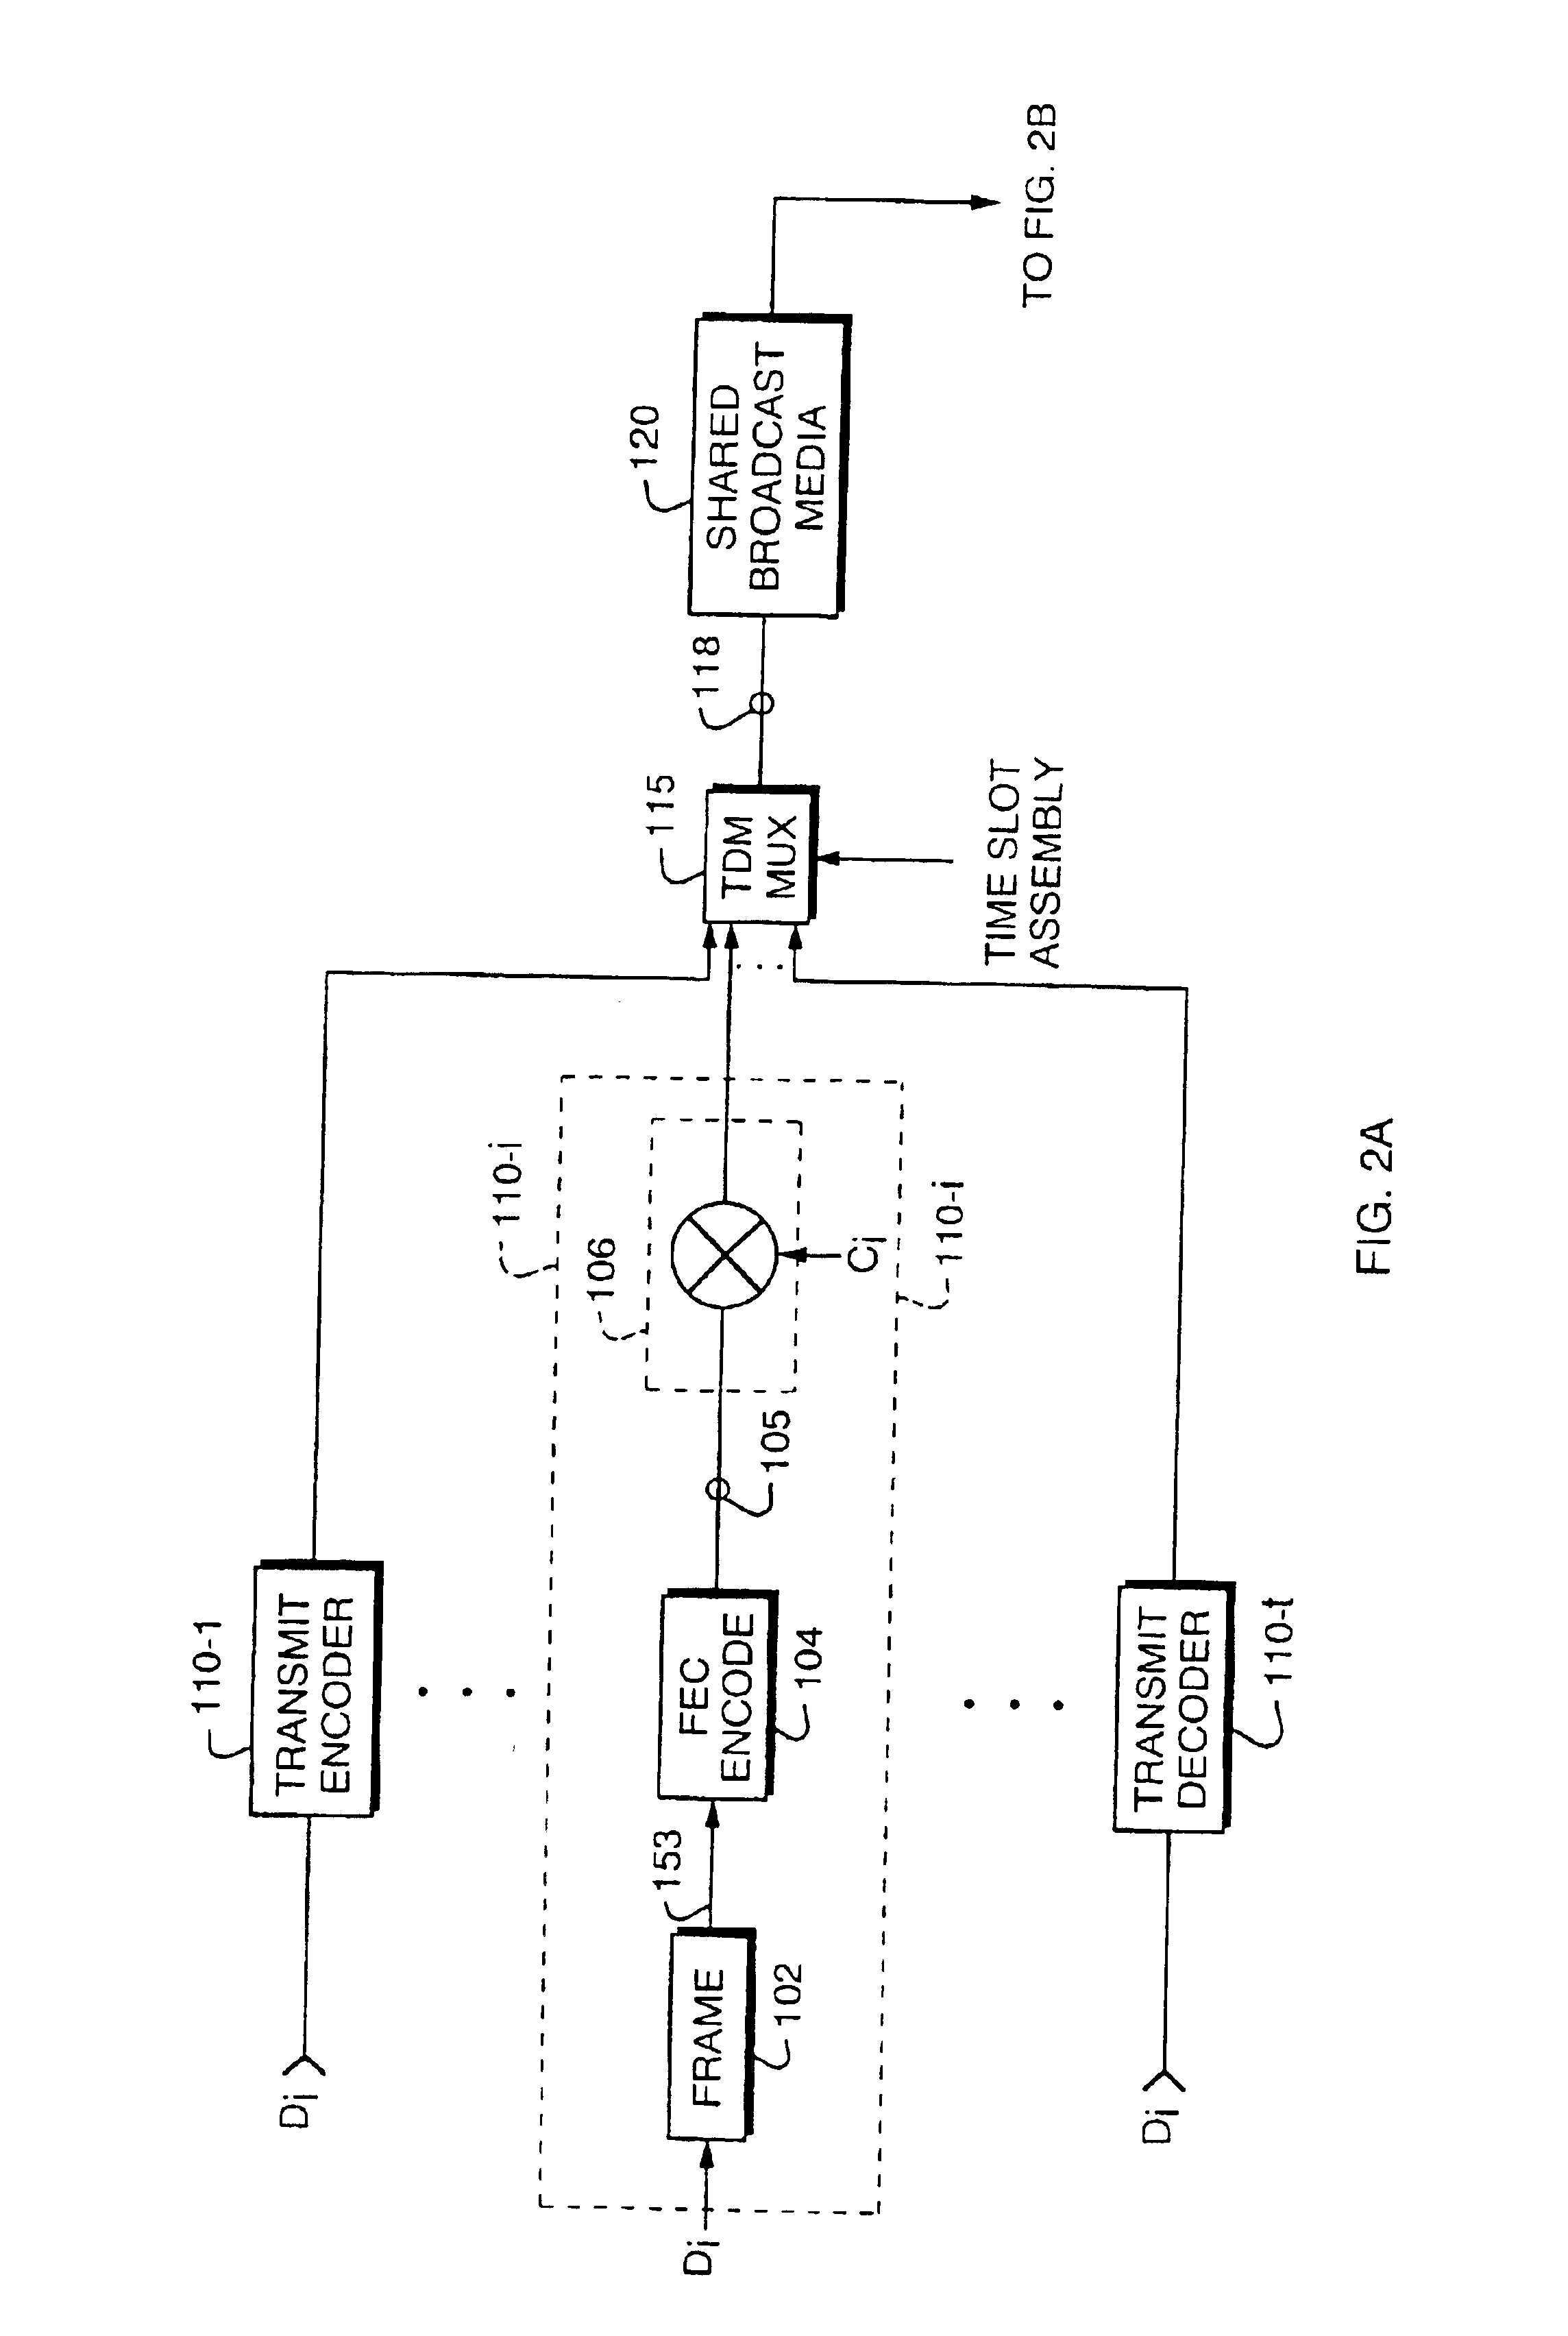 Receiver for time division multiplex system without explicit time slot assignment